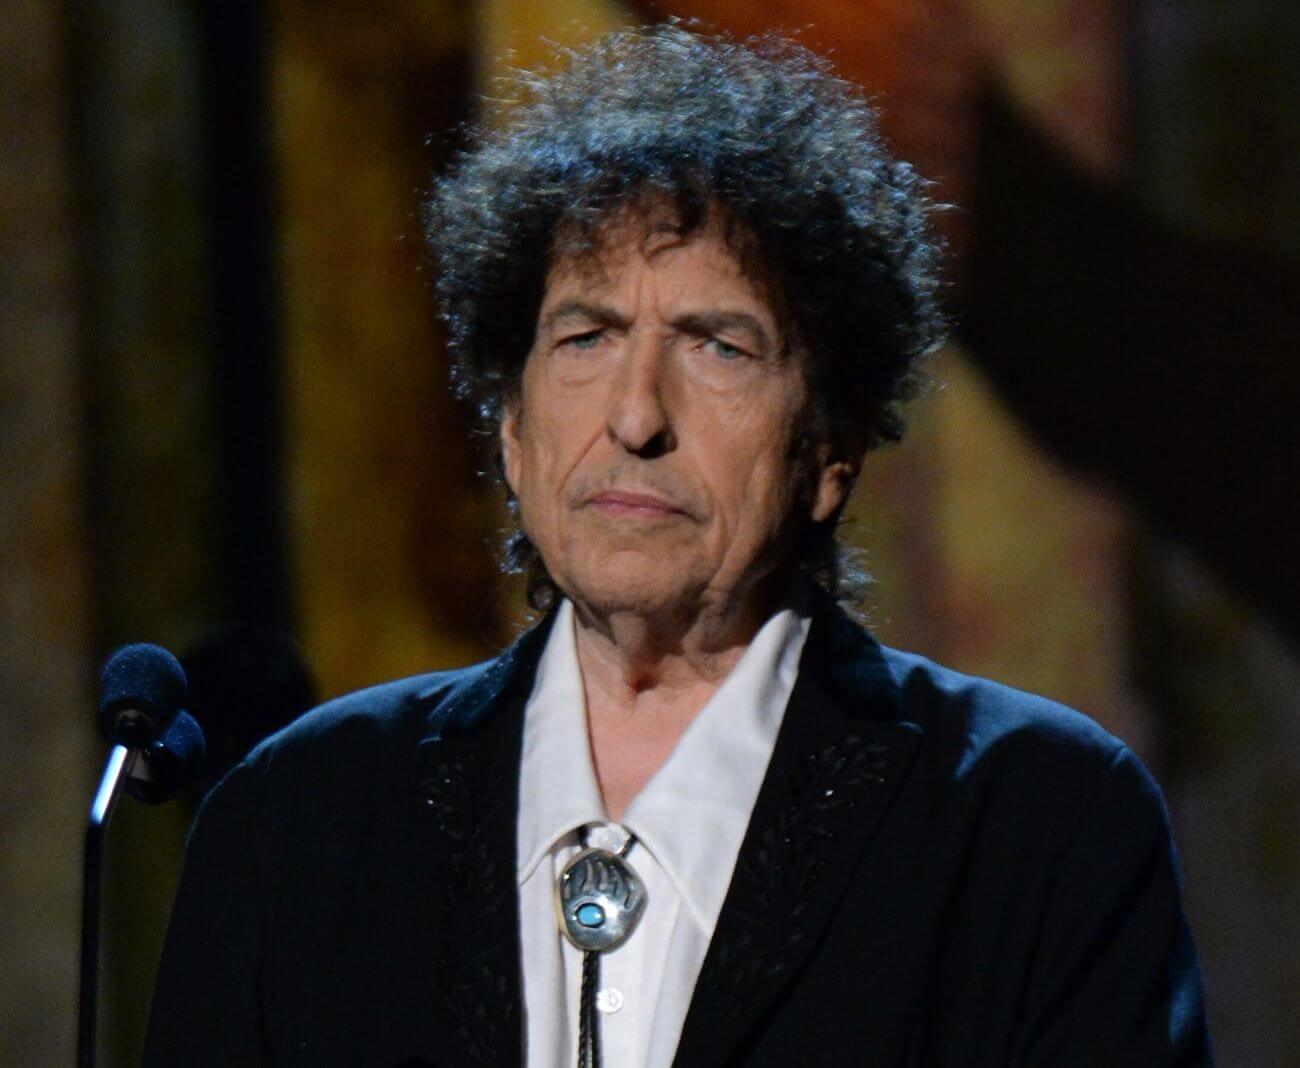 Bob Dylan wears a bolo tie and stands in front of a microphone.